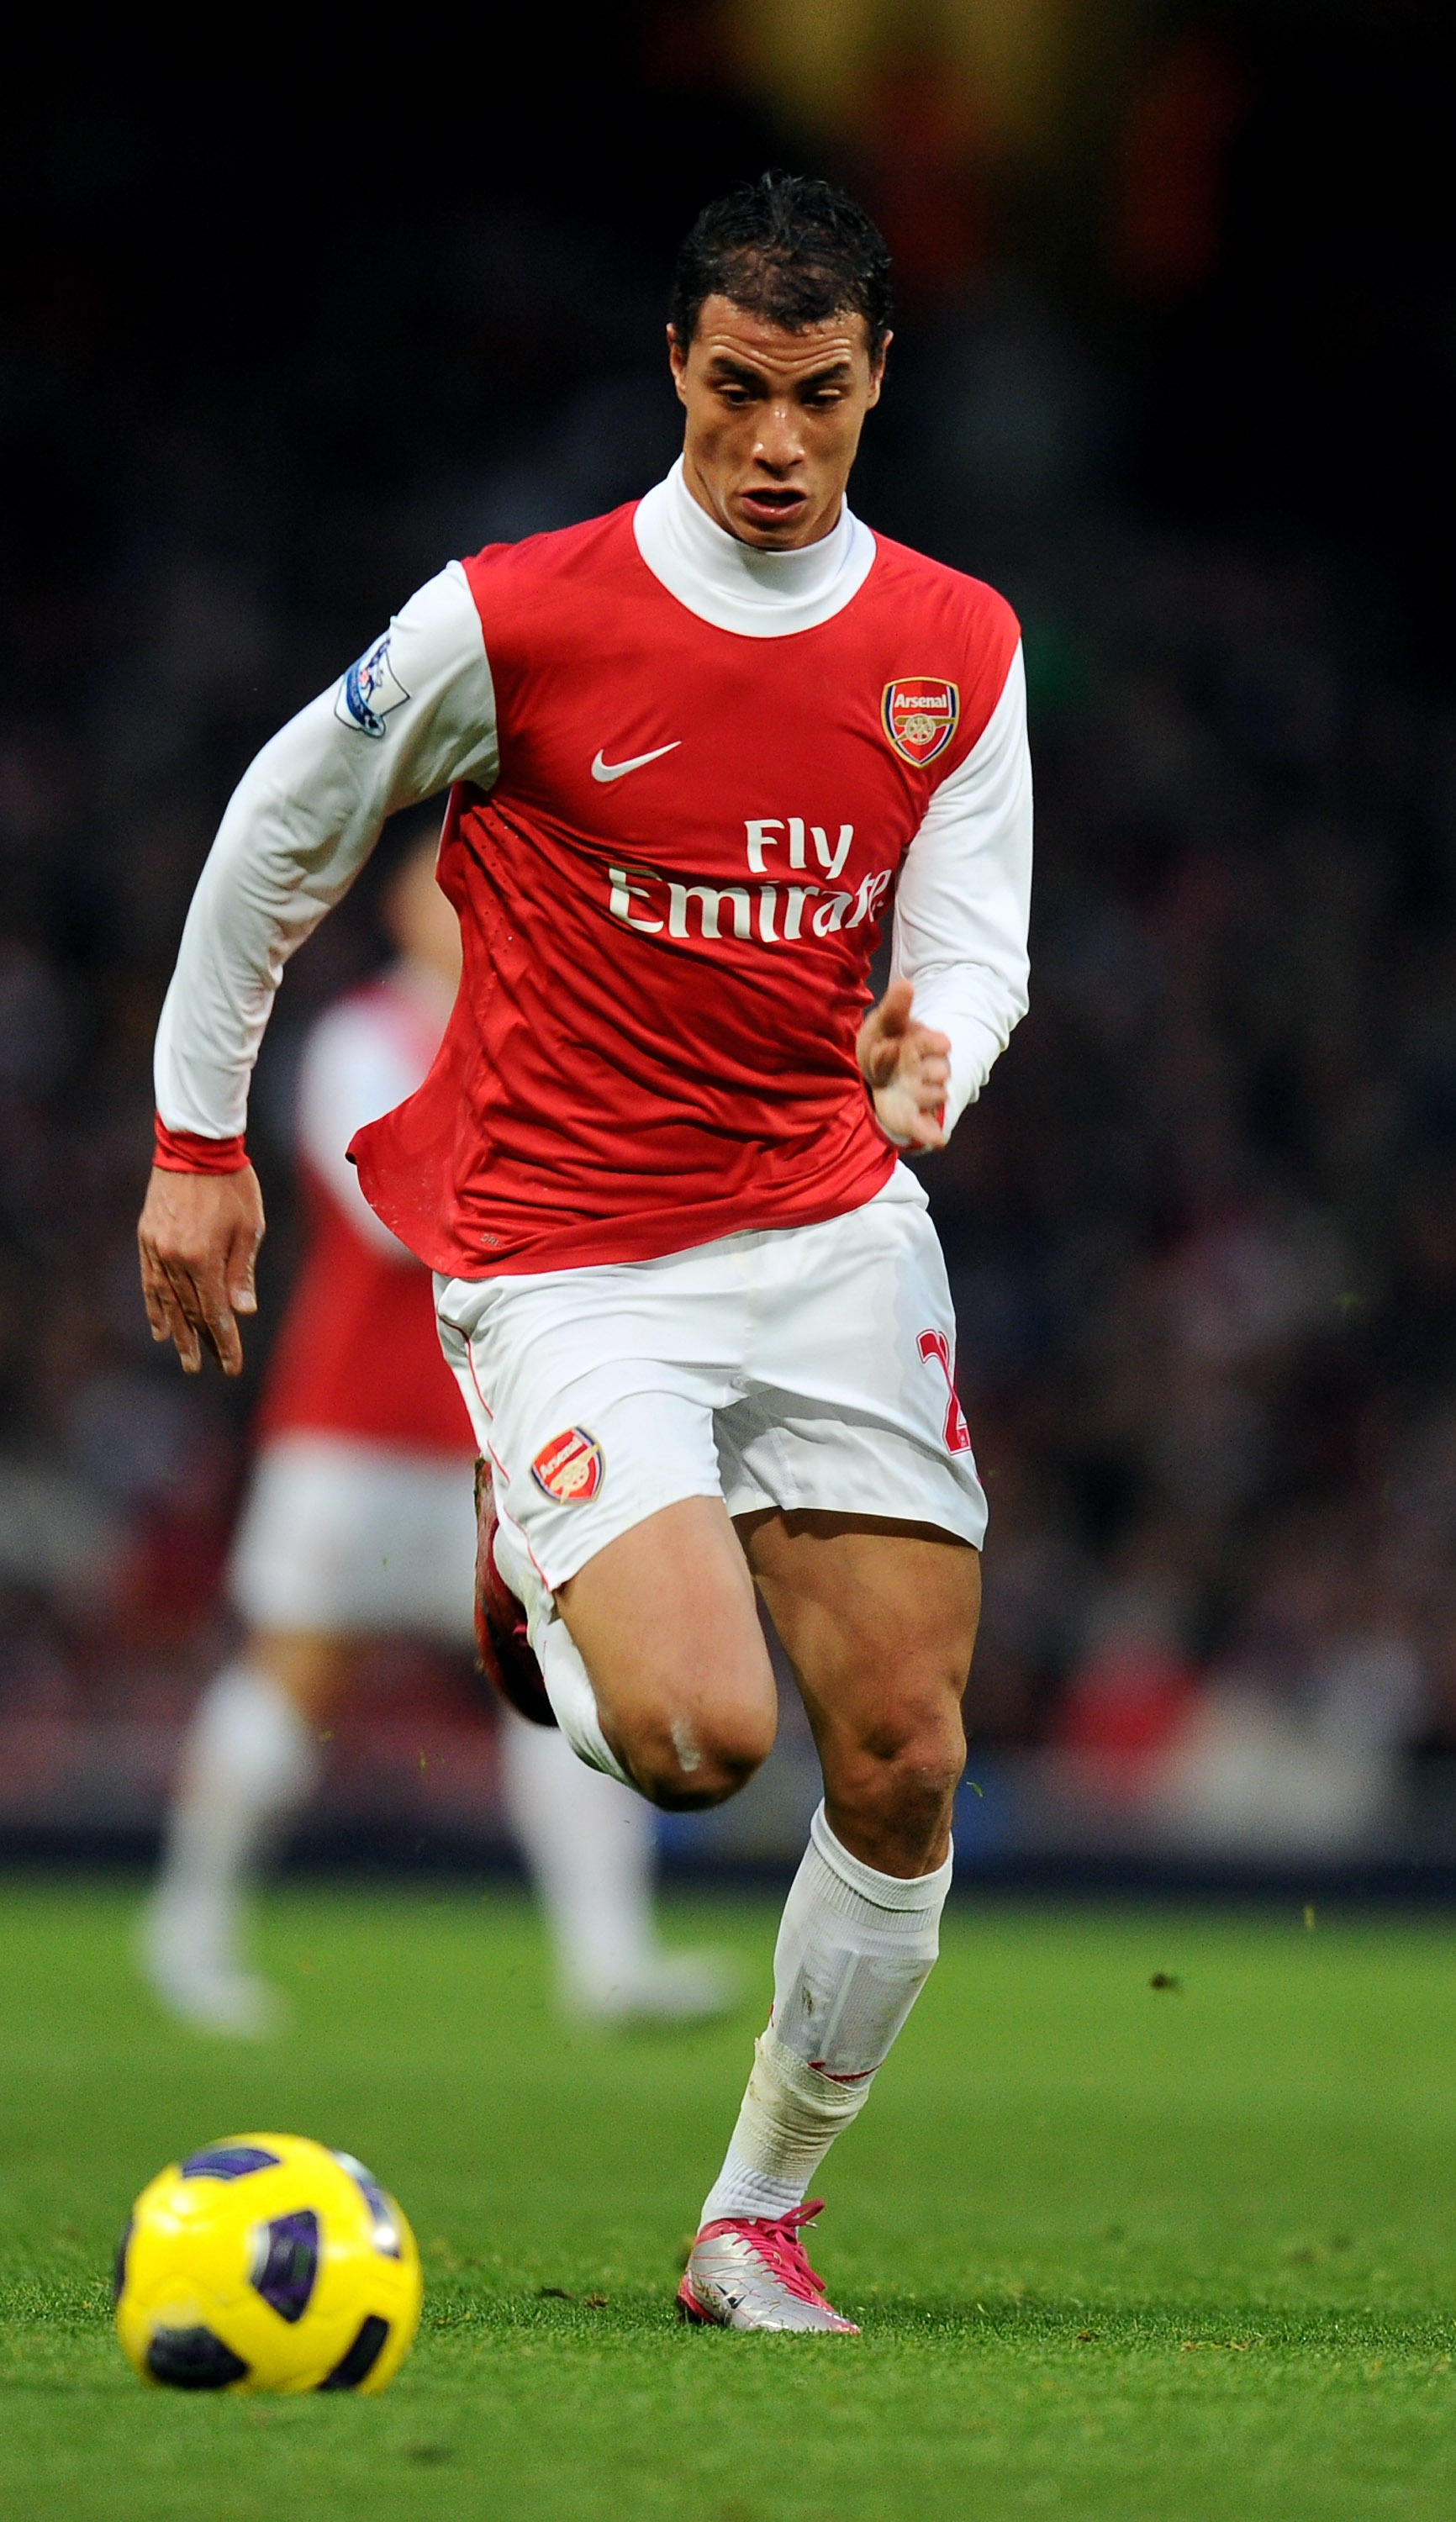 LONDON, ENGLAND - DECEMBER 04: Marouane Chamakh of Arsenal in action during the Barclays Premier League match between Arsenal and Fulham at the Emirates Stadium on December 4, 2010 in London, England.  (Photo by Mike Hewitt/Getty Images)